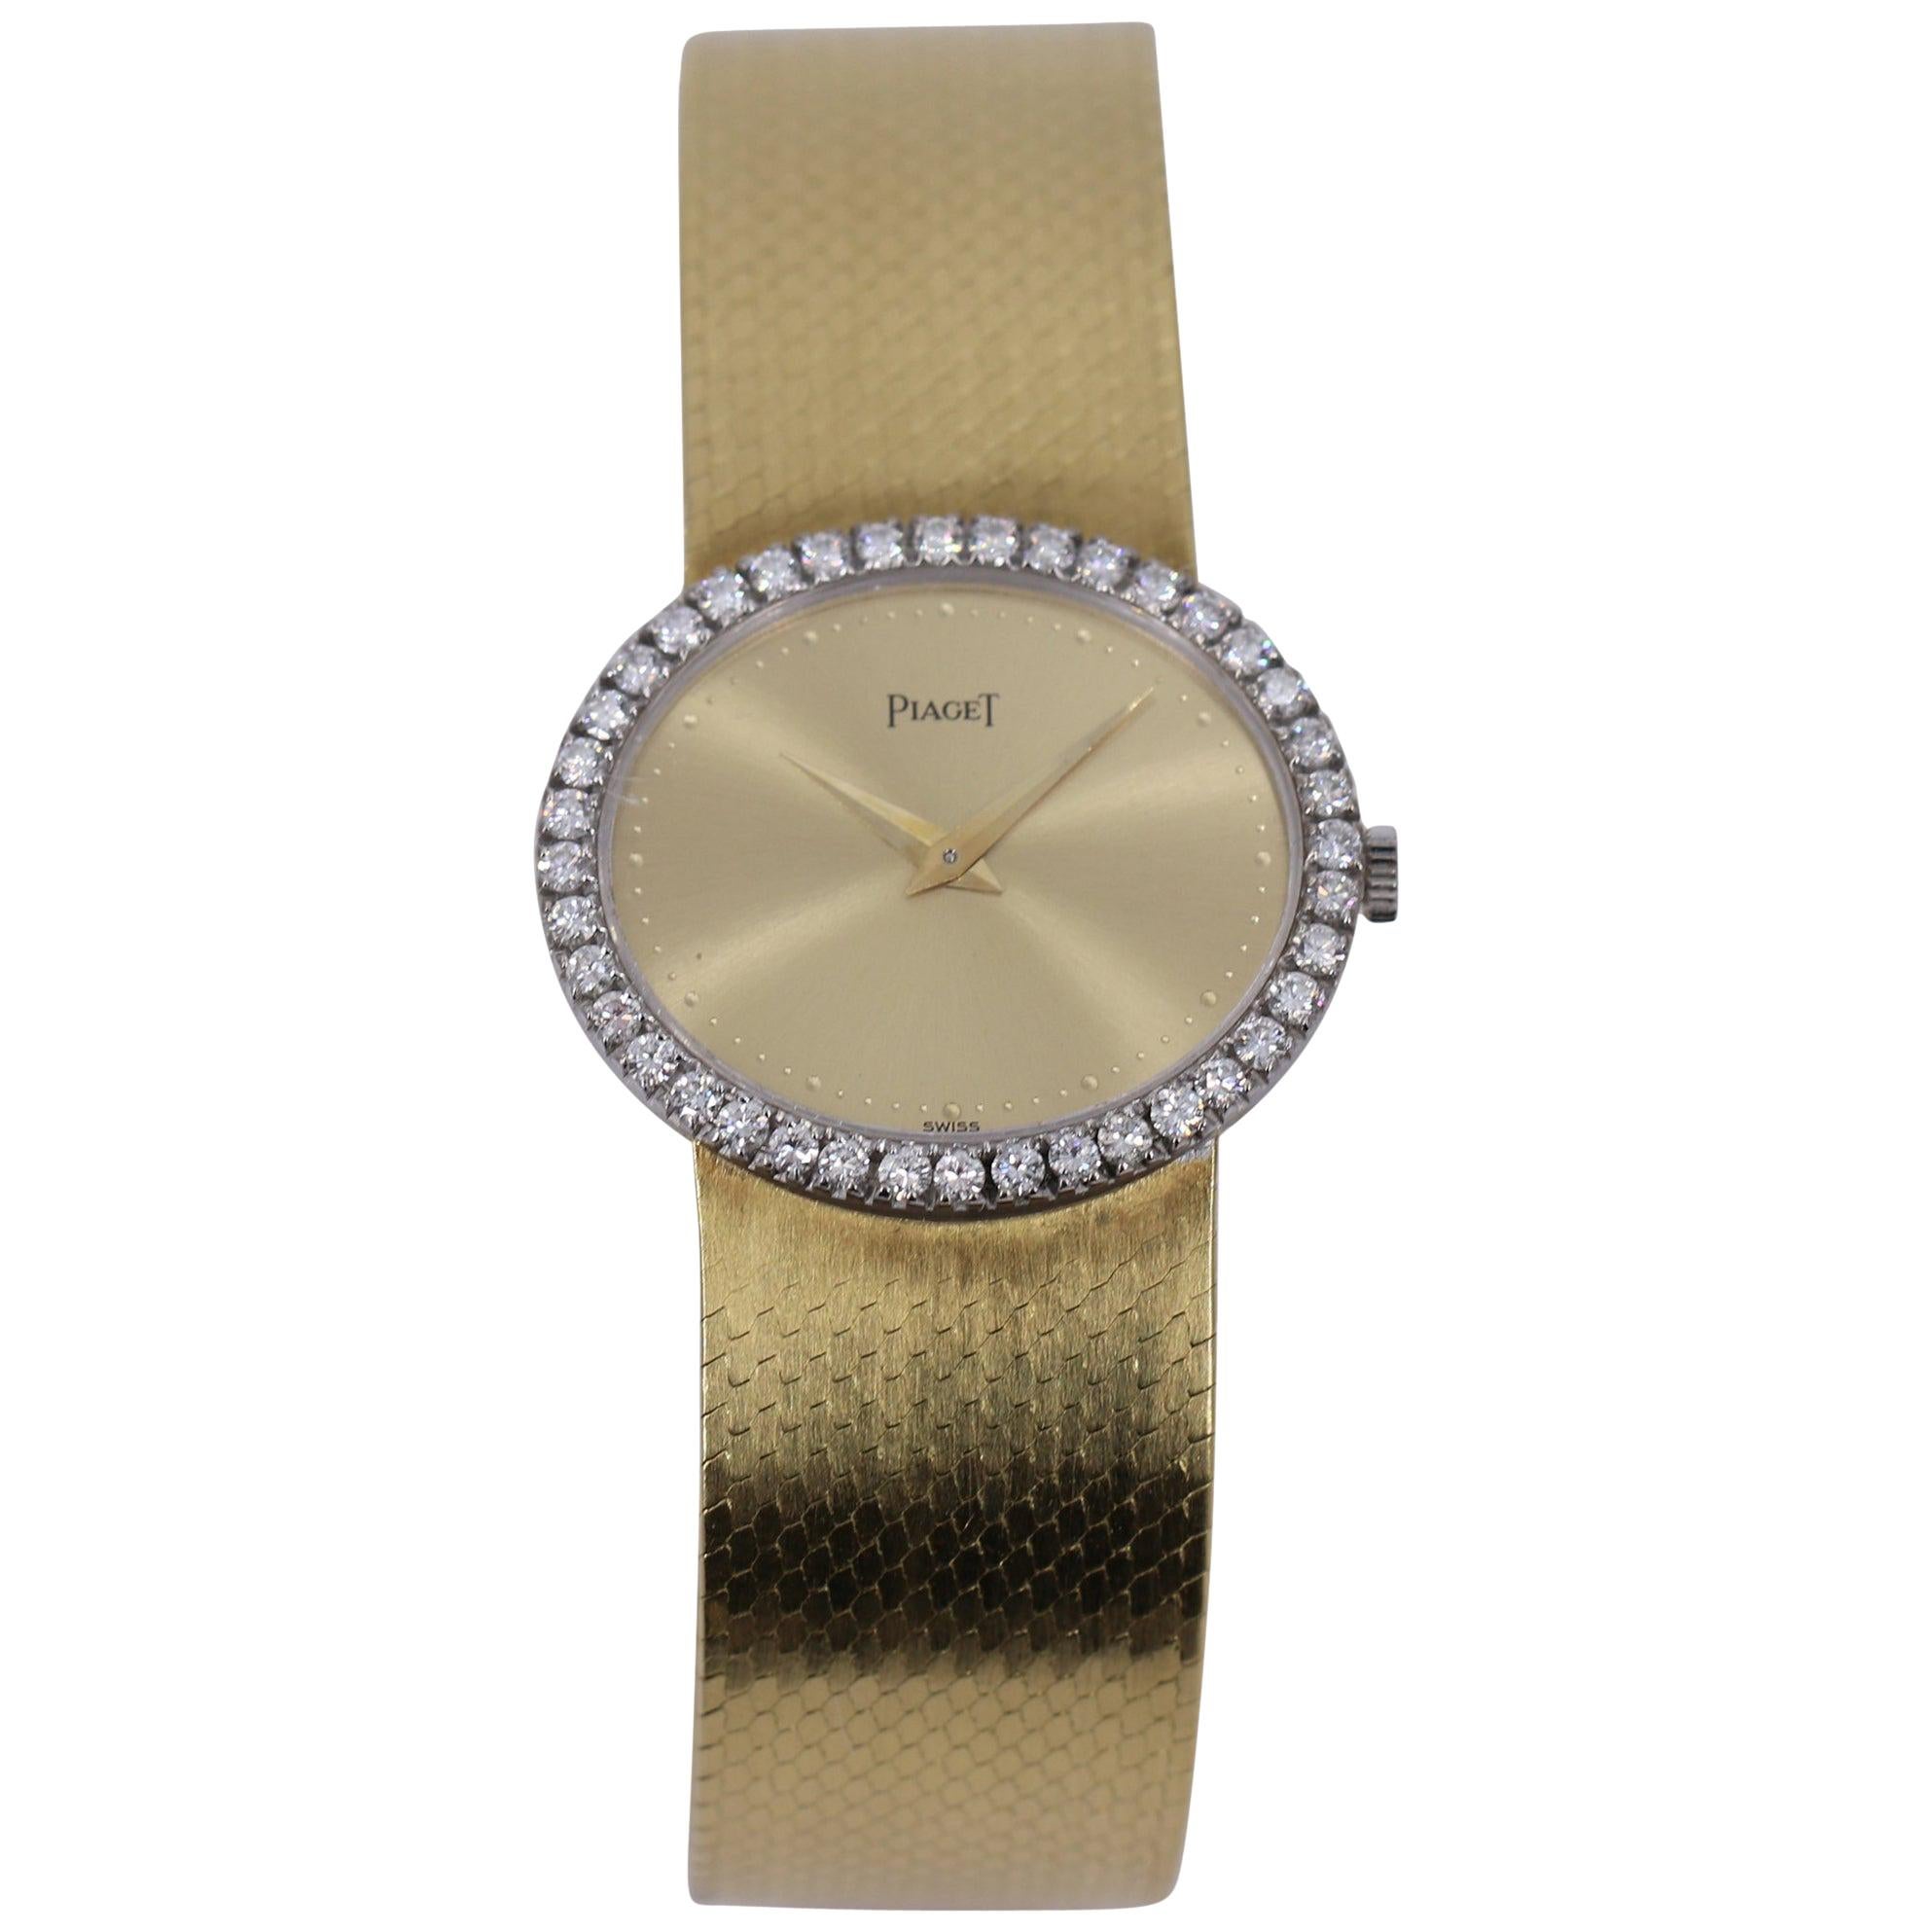 Ladies Gold Piaget Watch with Champagne Dial and Diamond Bezel